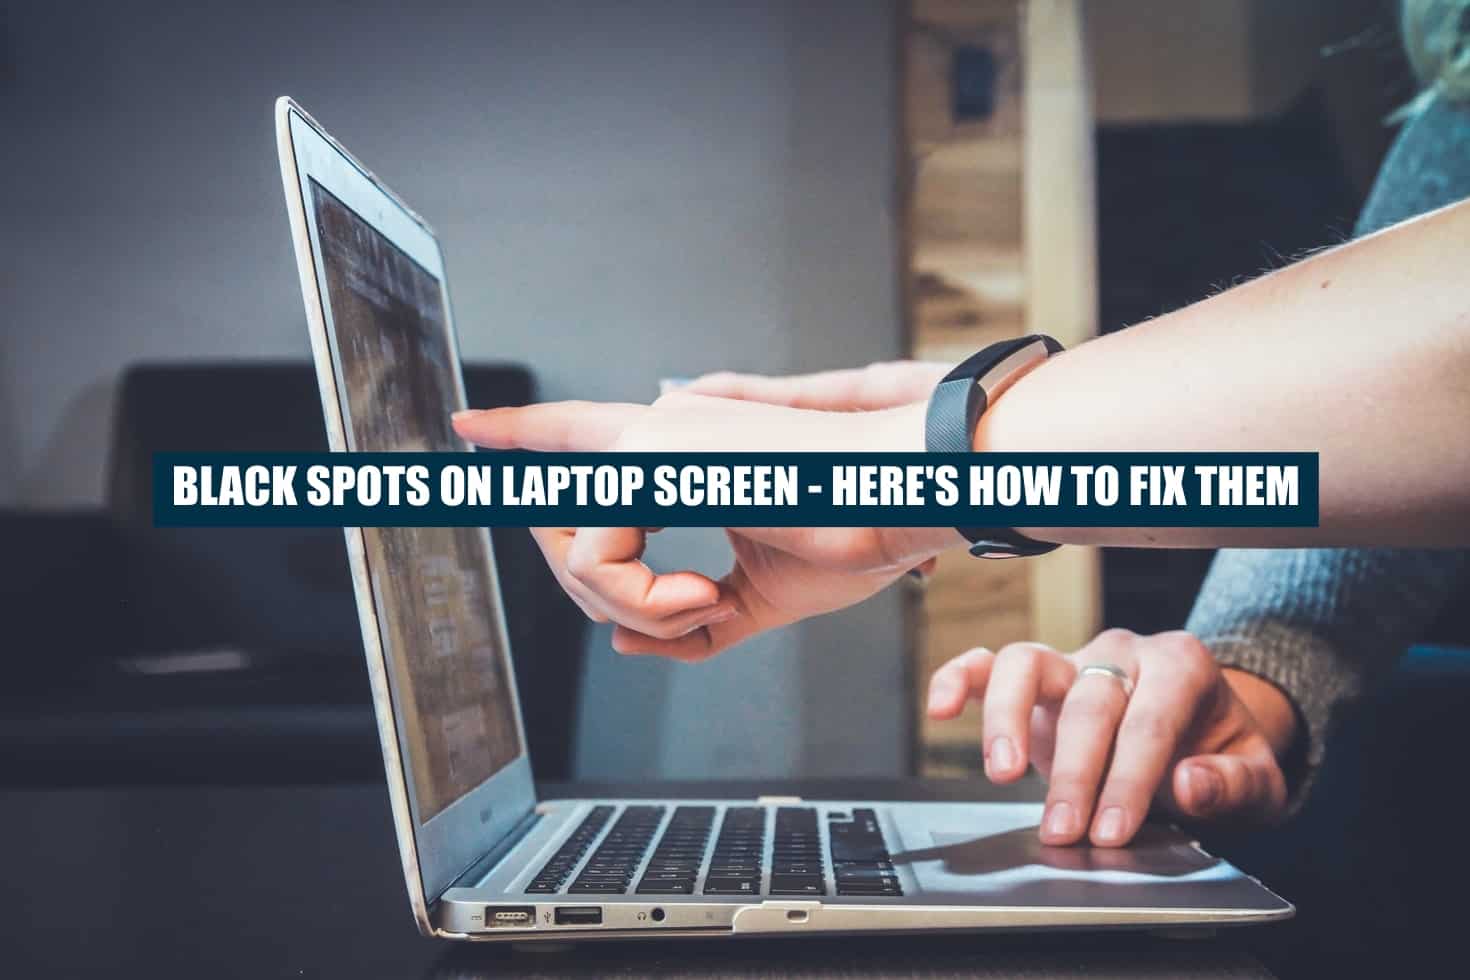 here is how you can try to fix black spots on your laptop screen